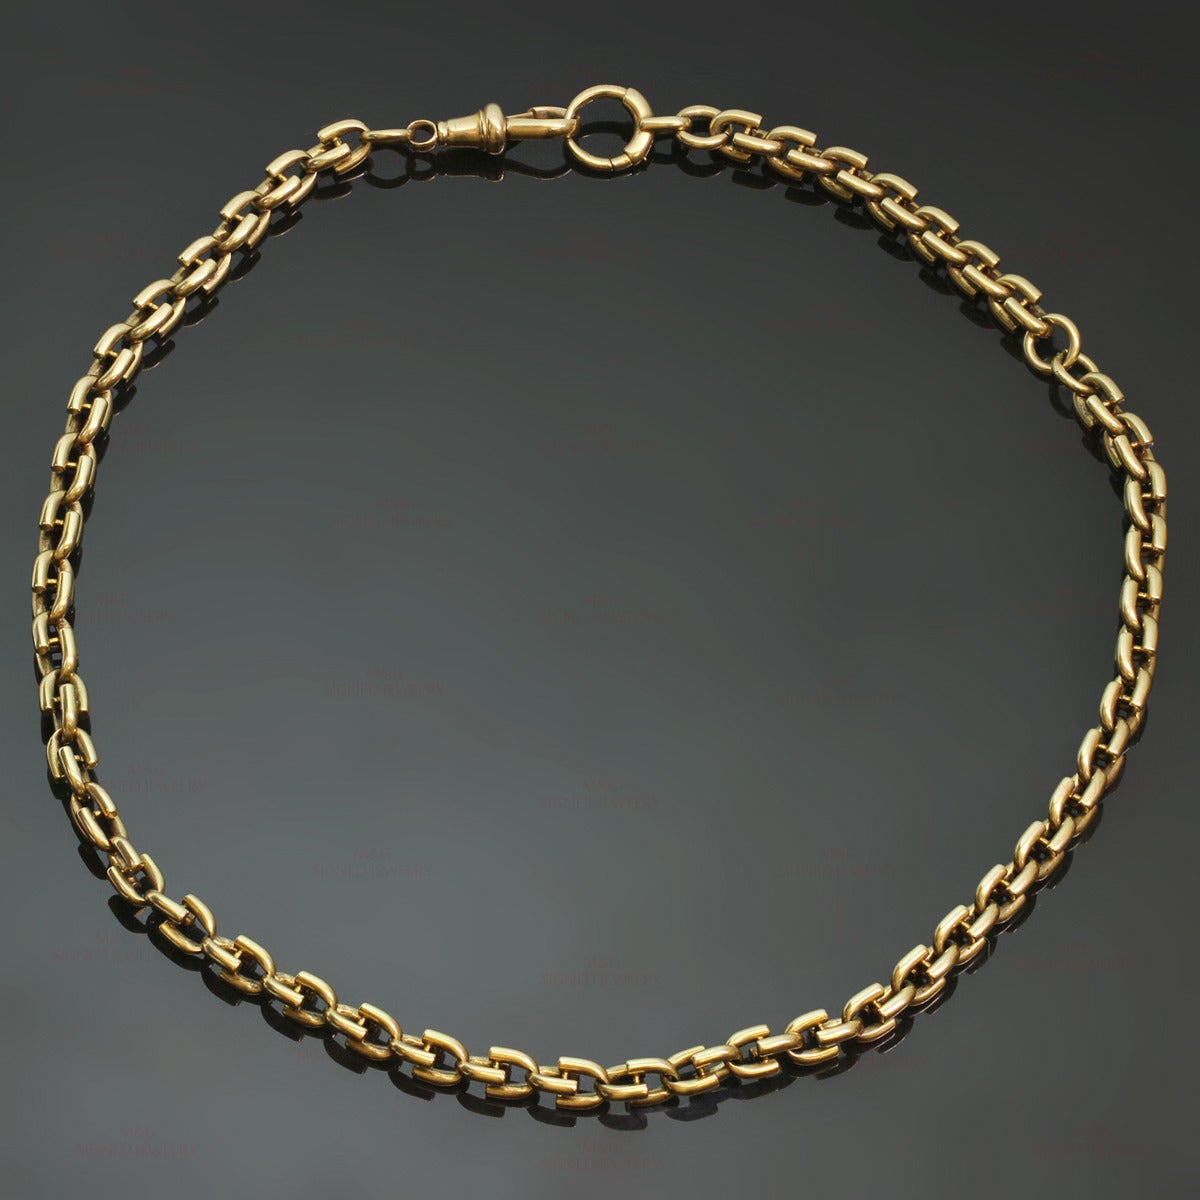 This versatile antique victorian chain is crafted out of 18k yellow gold and is a perfect accessory for a pocket watch or can be worn as a necklace. Made in United States circa 1900s. Measurements: 0.23